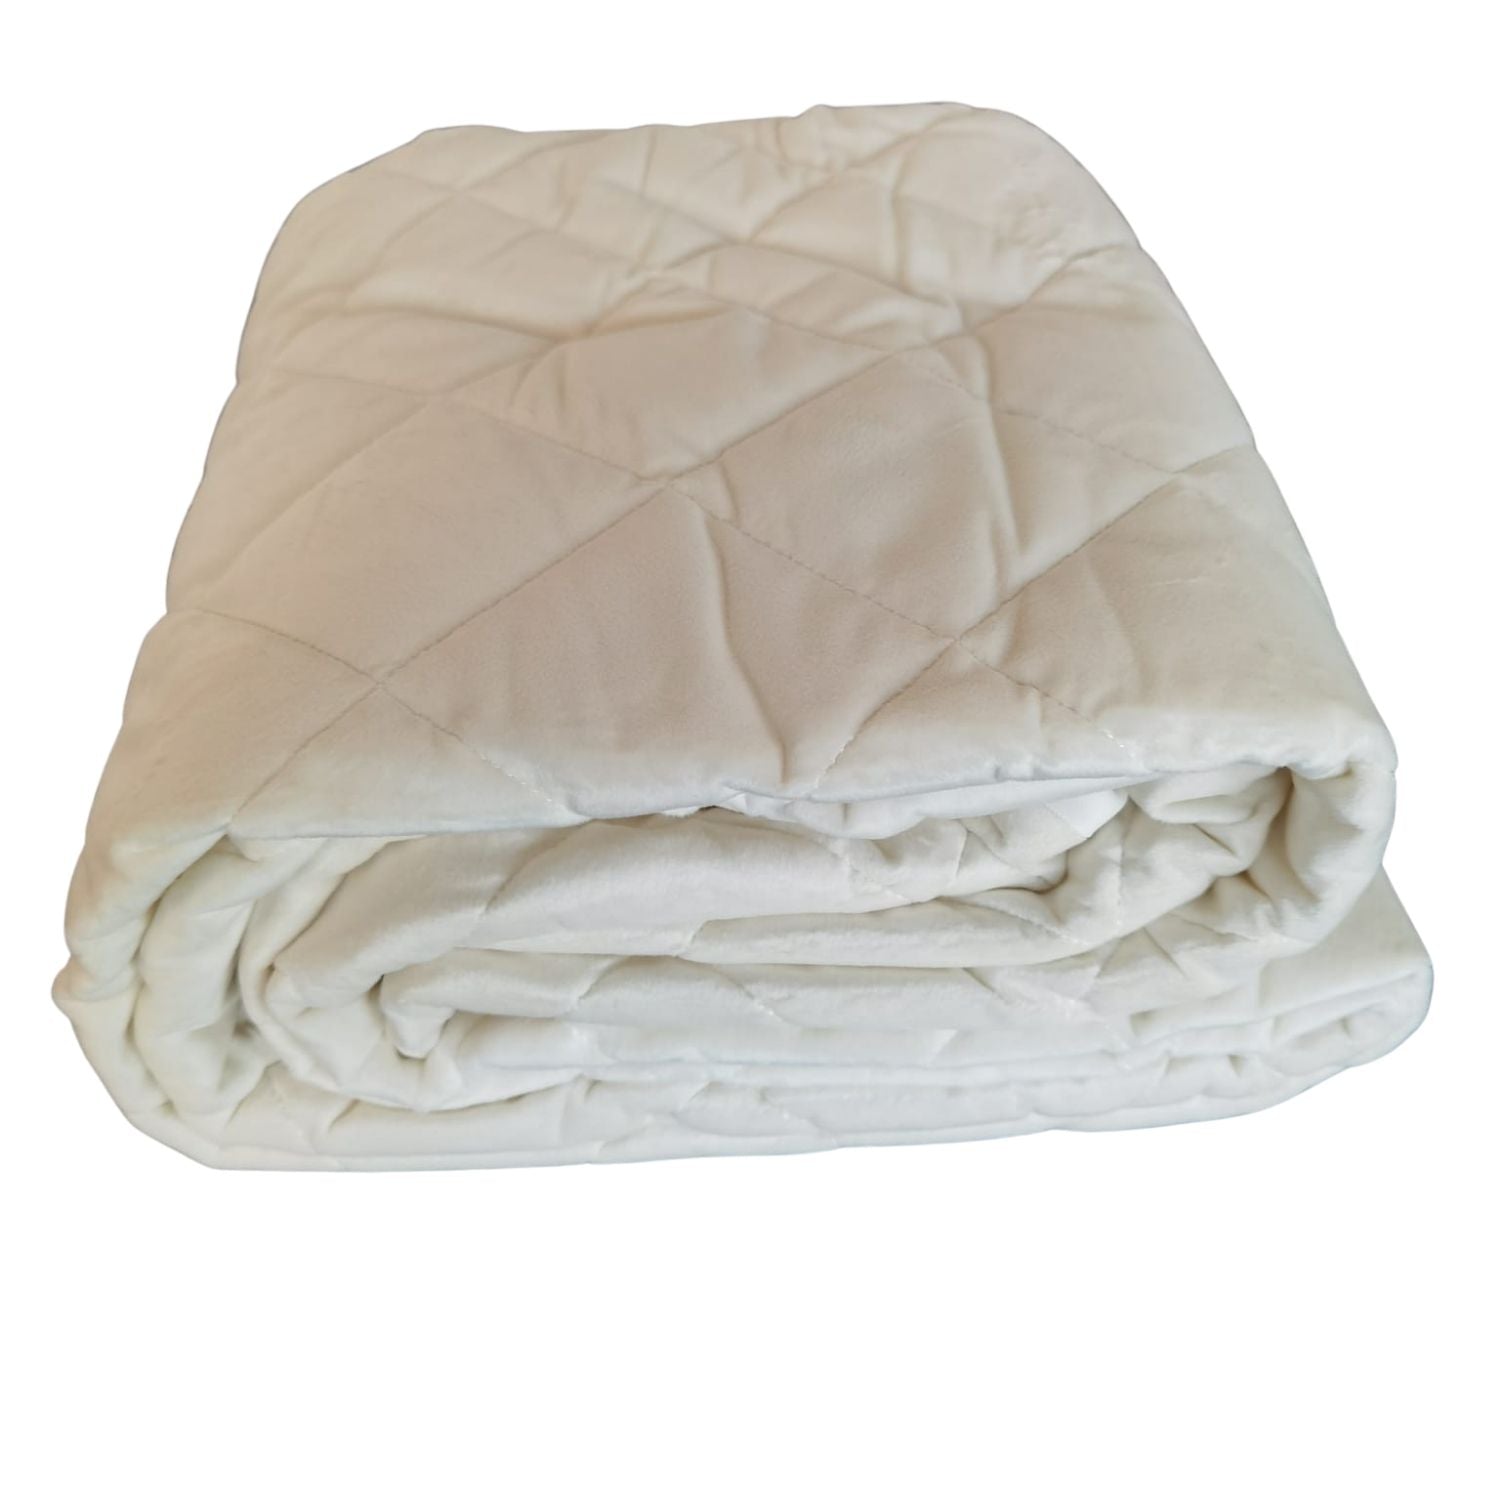 The Home Bedroom Fleece Mattress Protector - White - Single Size 1 Shaws Department Stores